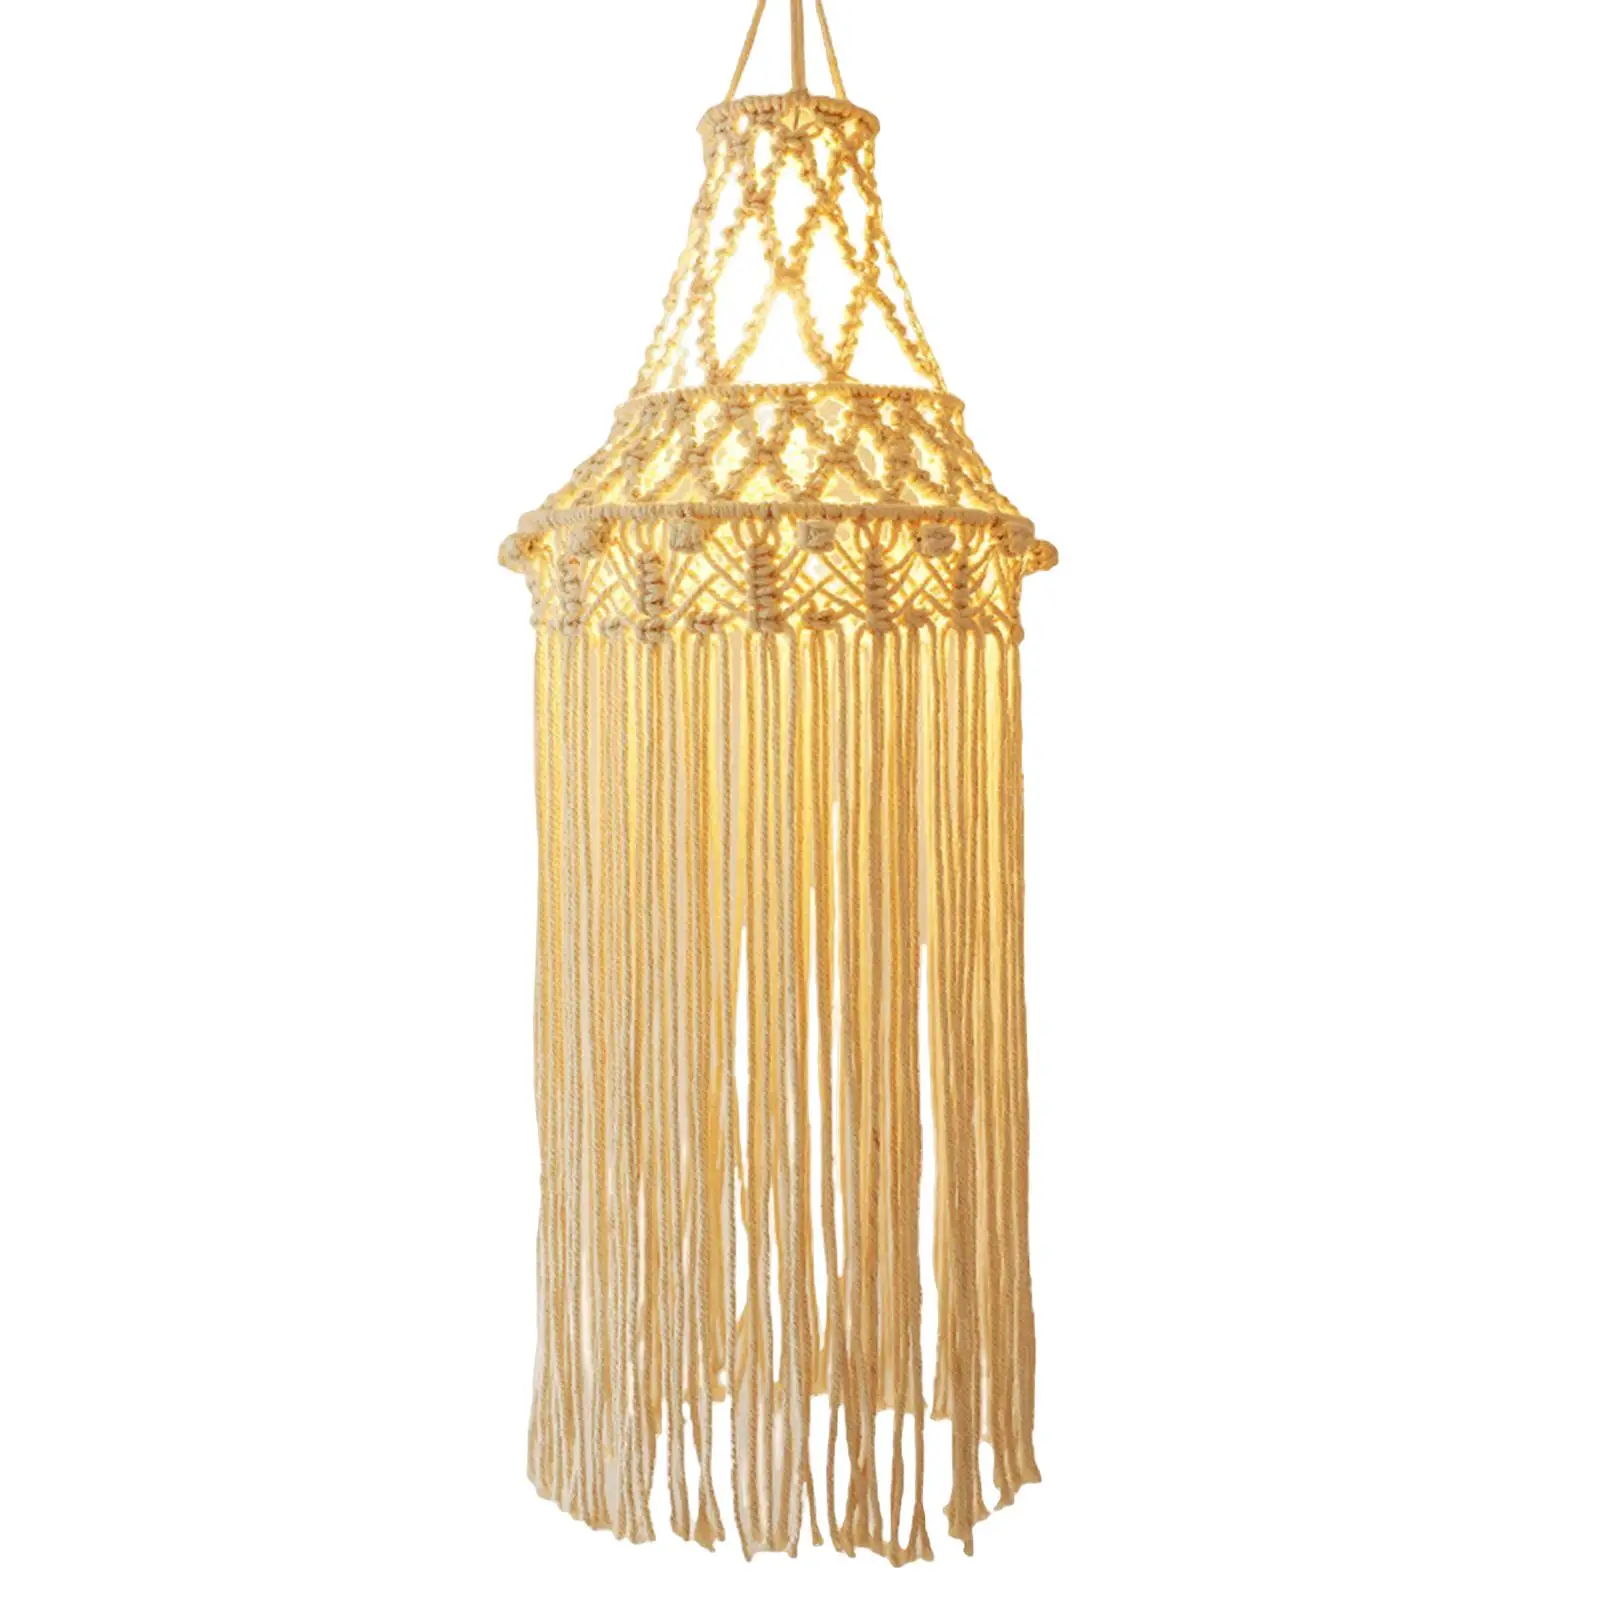 Vintage Style Lampshade Woven Boho Pendant Chandeliers Hanging Cotton Macrame Lamp Shade Decor for Office Hotel Bedroom